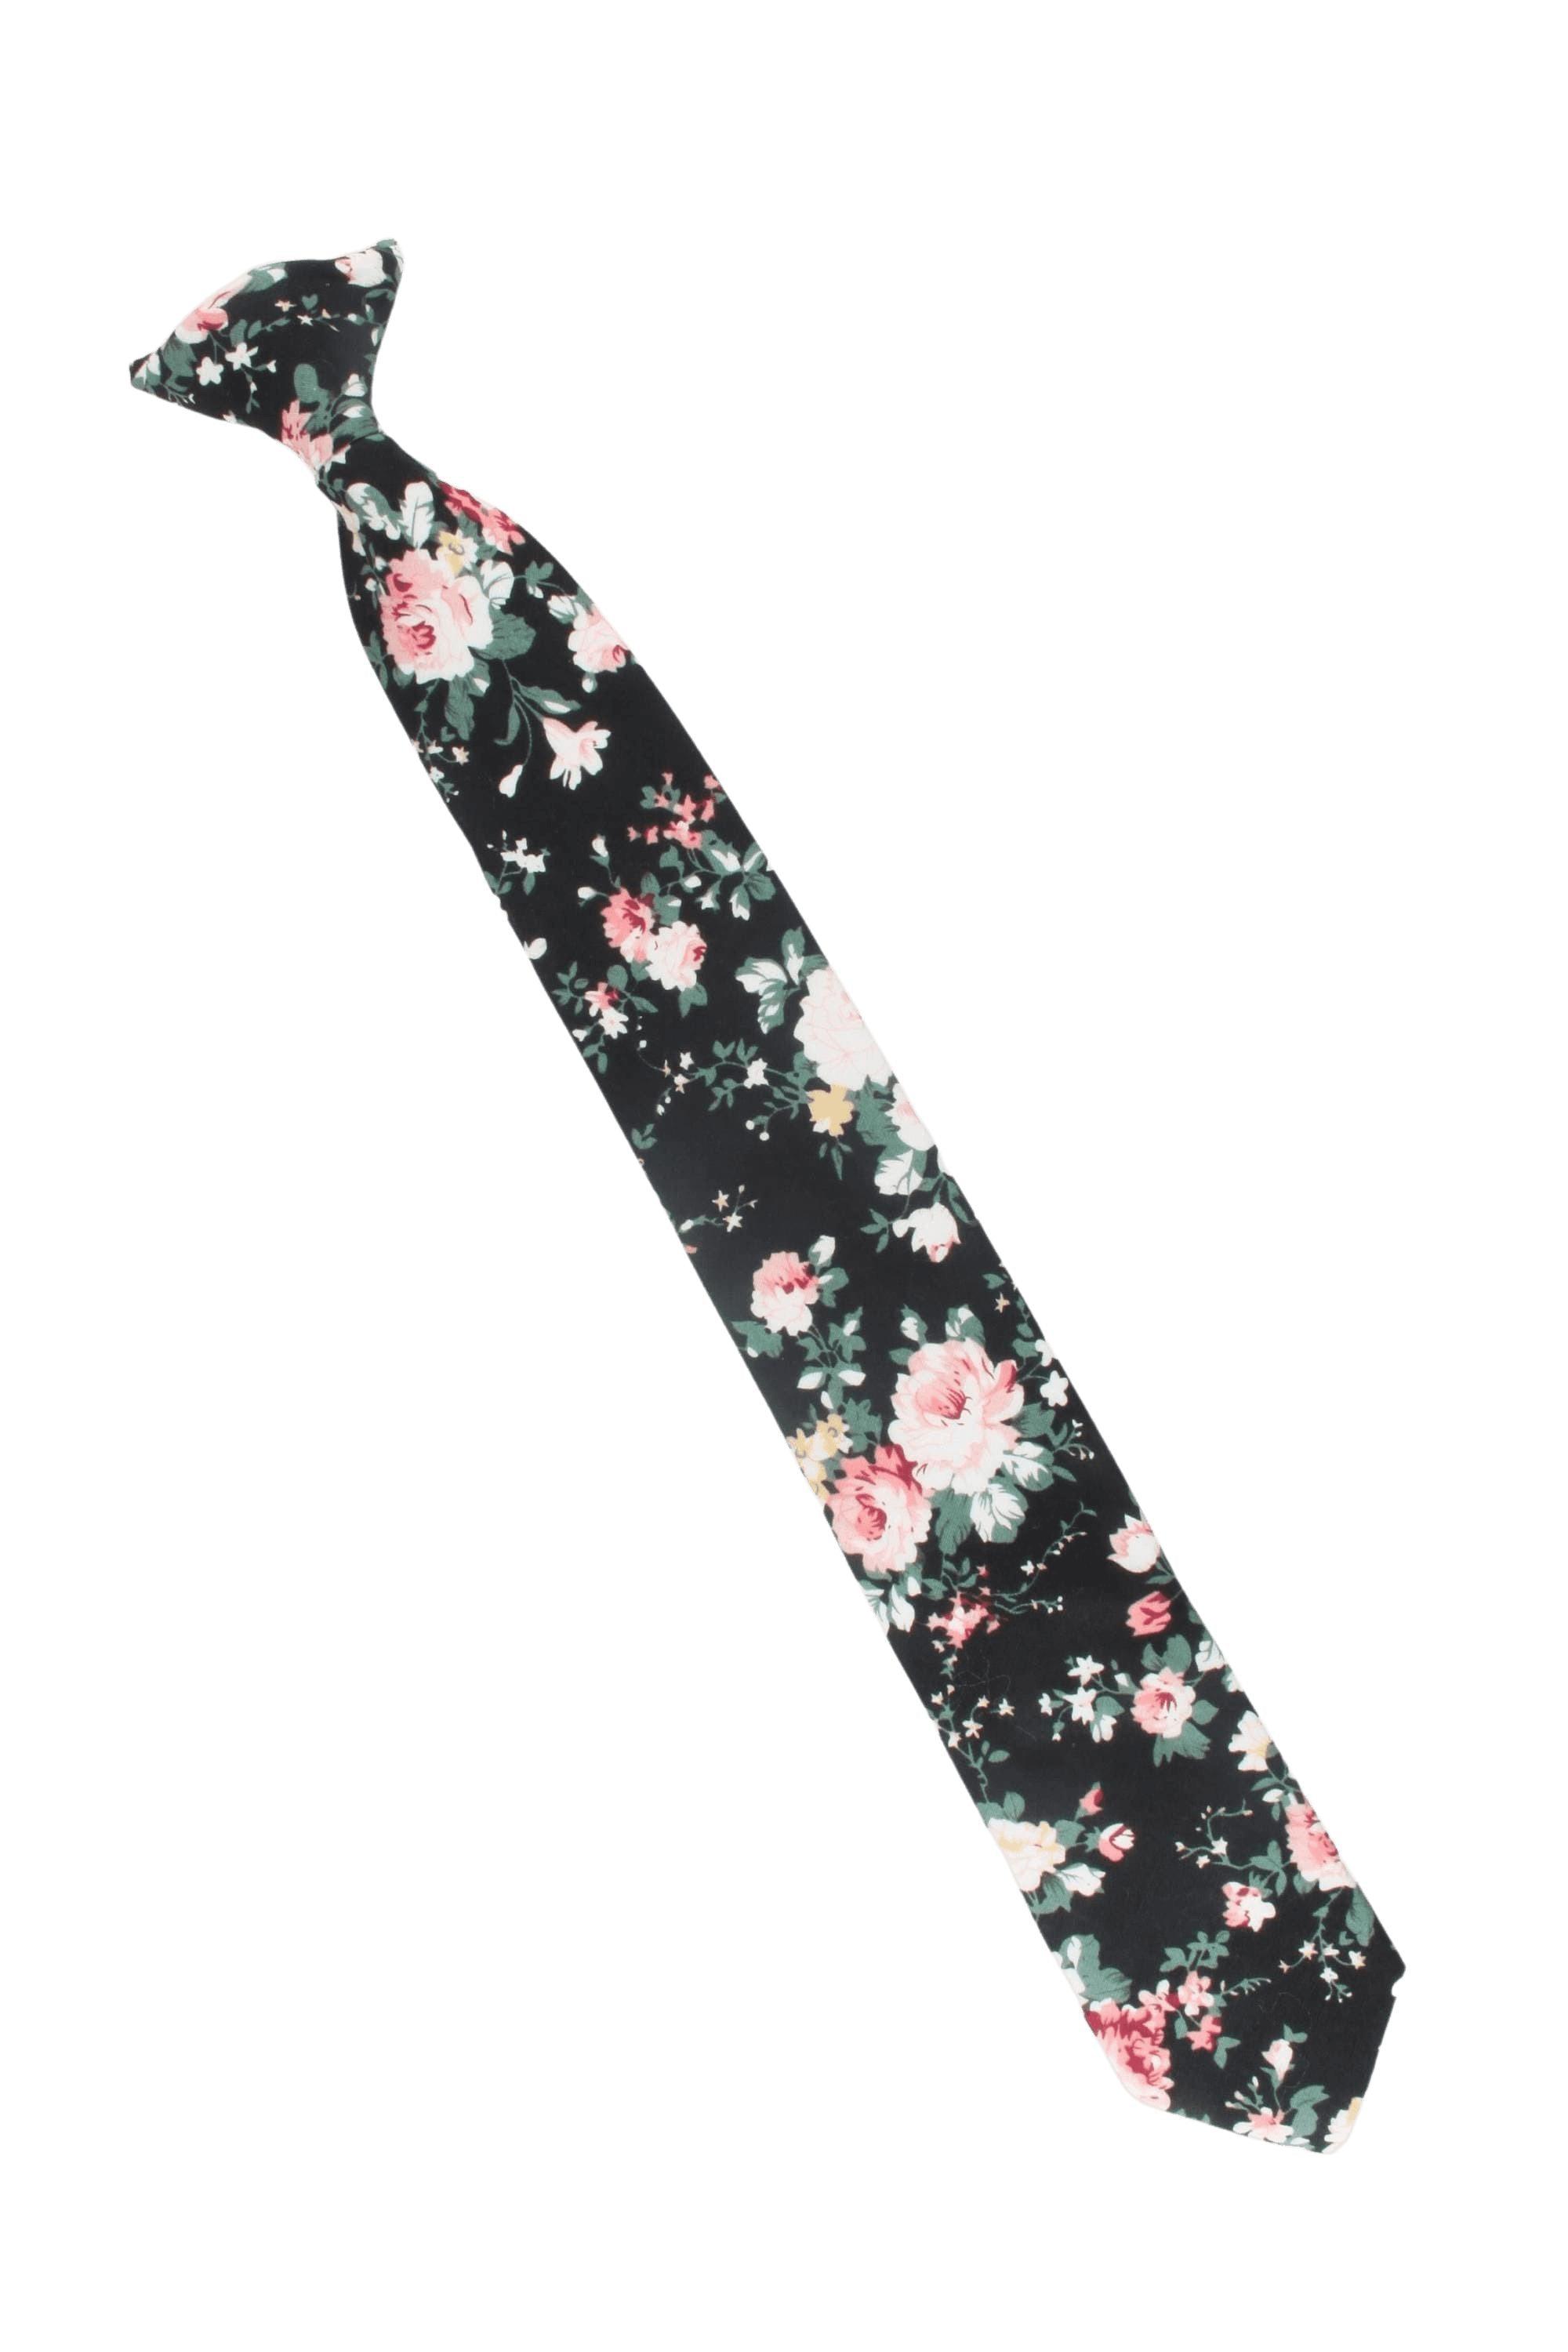 Black Floral Tie for kids, clip on tie for children kids teens DAN MYTIESHOP-Black Floral Tie for kids Material:Cotton Blend Approx Size: Max width: 6.5 cm / 2.4 inches 9-24 months 26 CM2-5 years 31 CM9-11 Years 43 CM Color: Black Great for: Prom Dinners Interviews Photo shoots Photo sessions Dates Engagement pictures Western weddings Floral Cotton necktie for babies and kids for weddings and events. Great anniversary present and gift. Also great gift for the groom and his groomsmen to wear at t